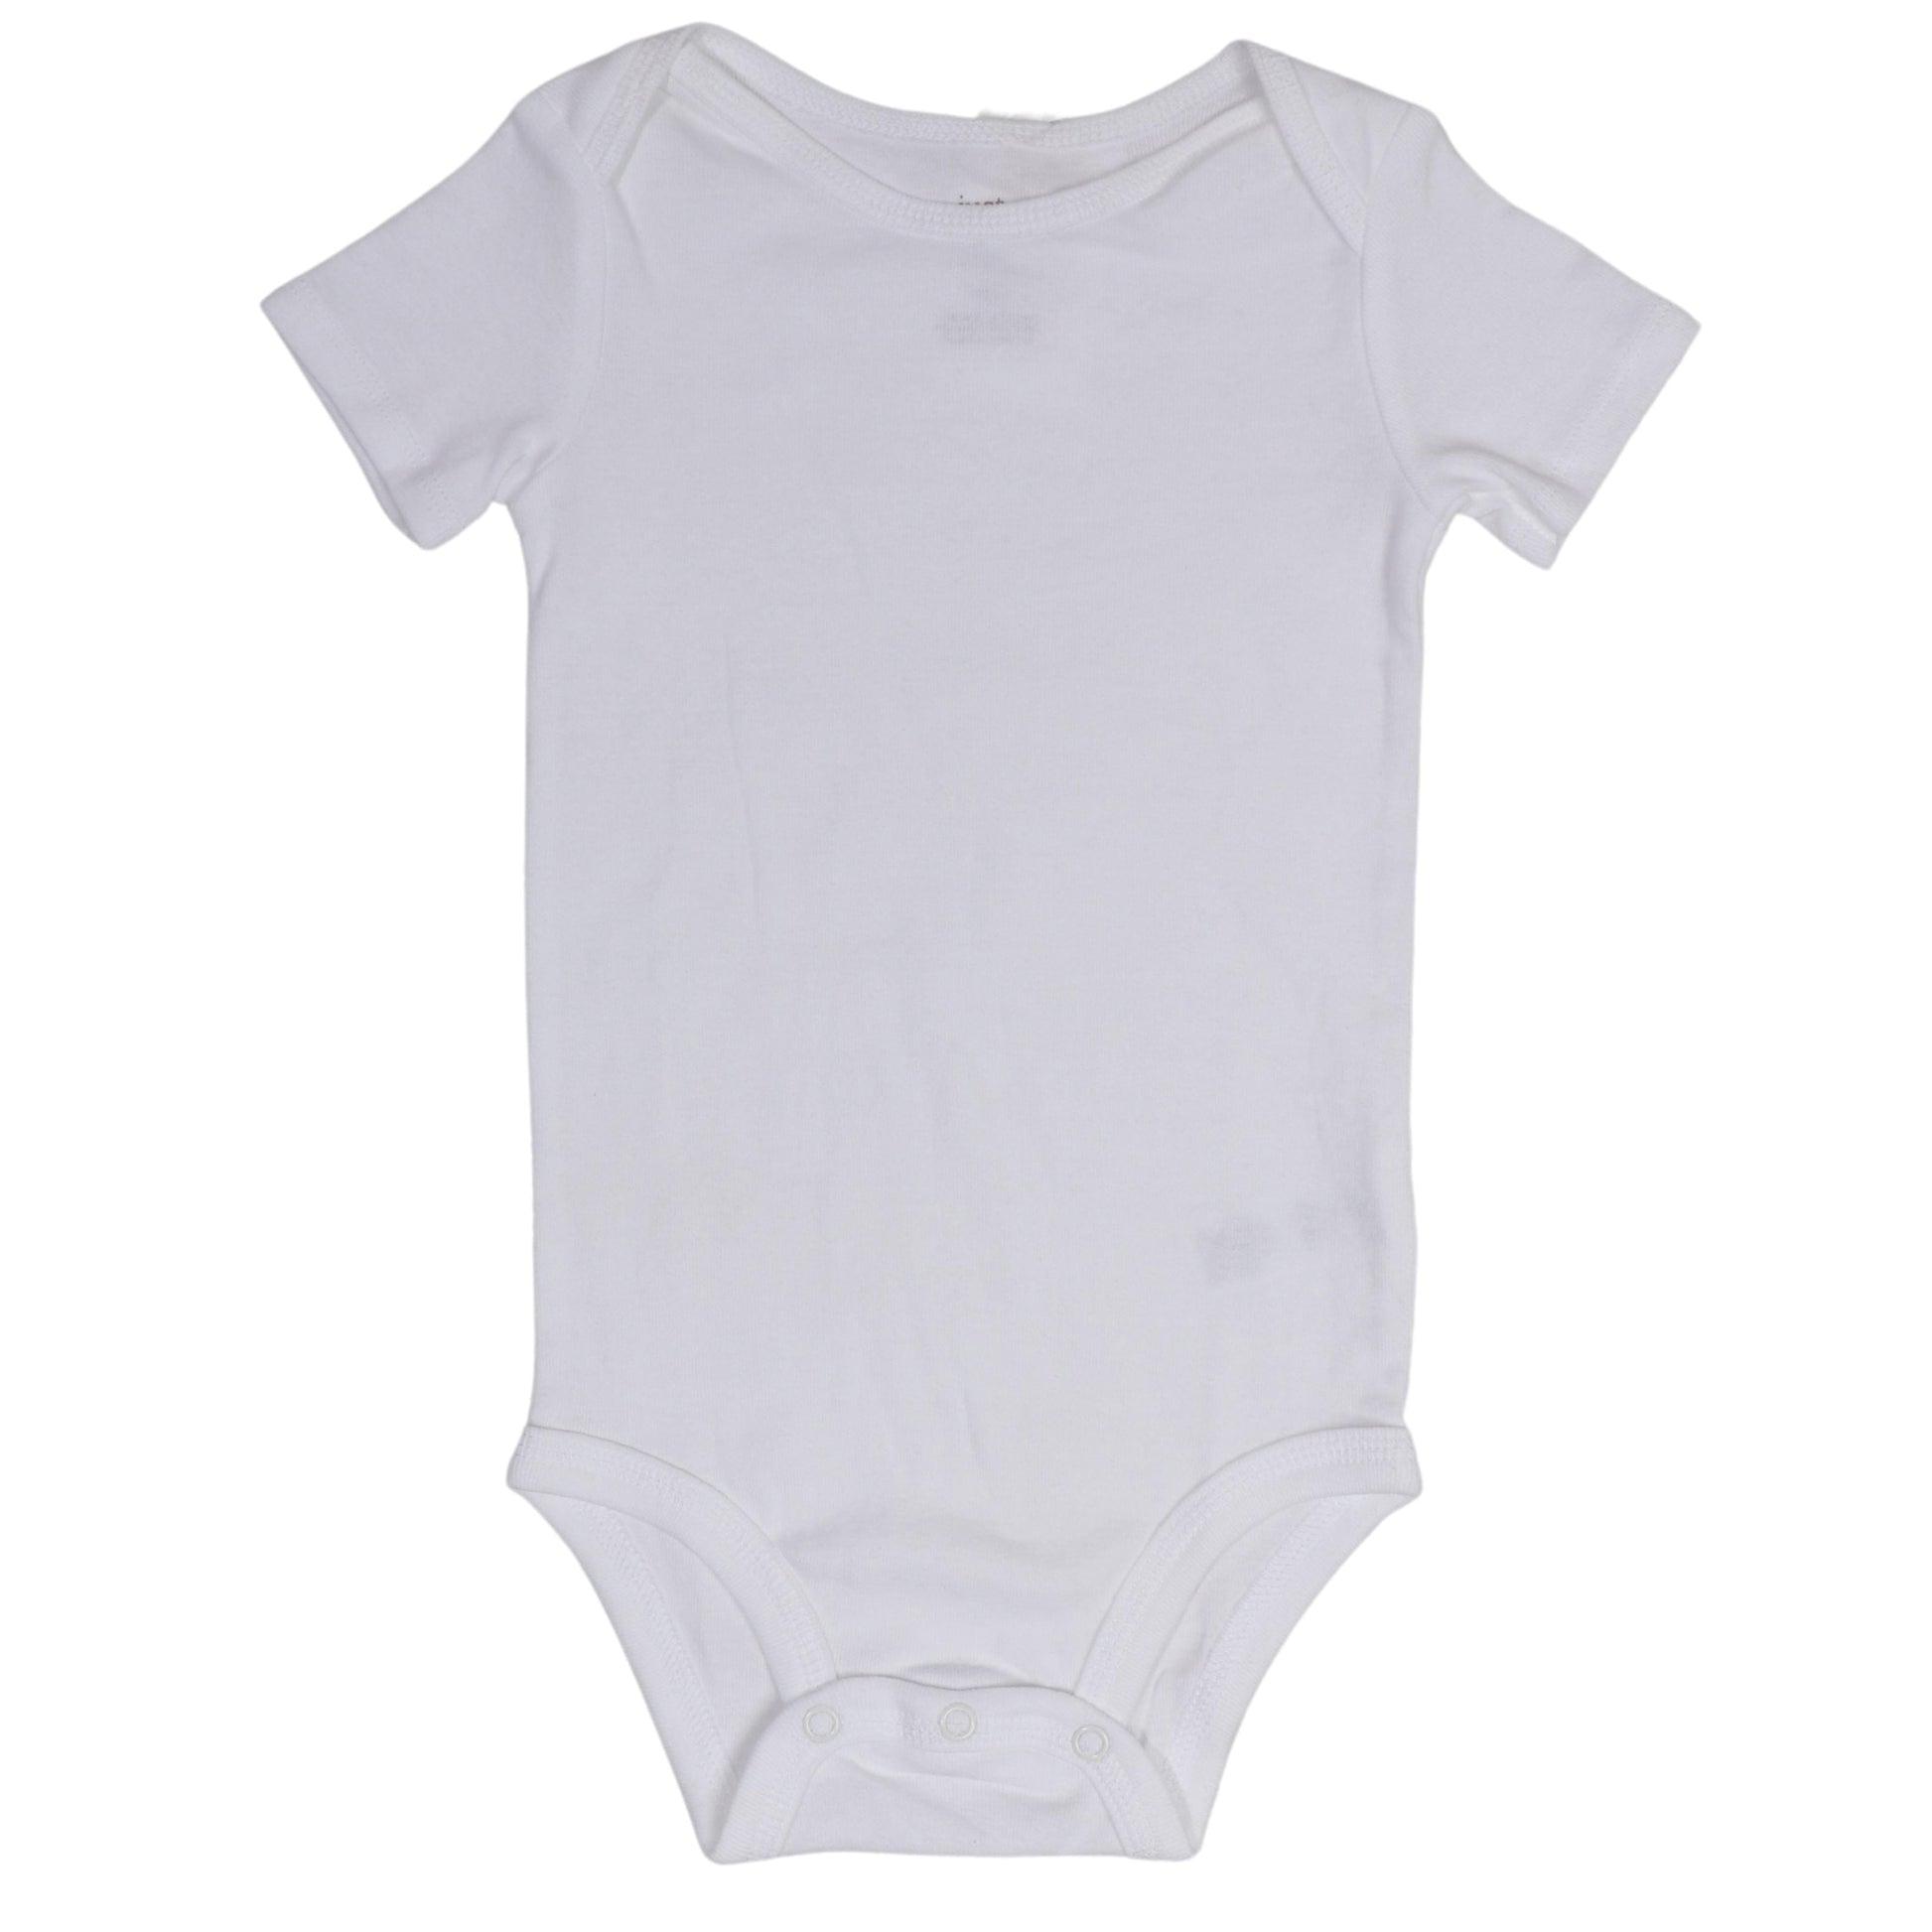 CARTER'S Baby Boy 18 Month / White CARTER'S - Baby - Casual Bodysuit